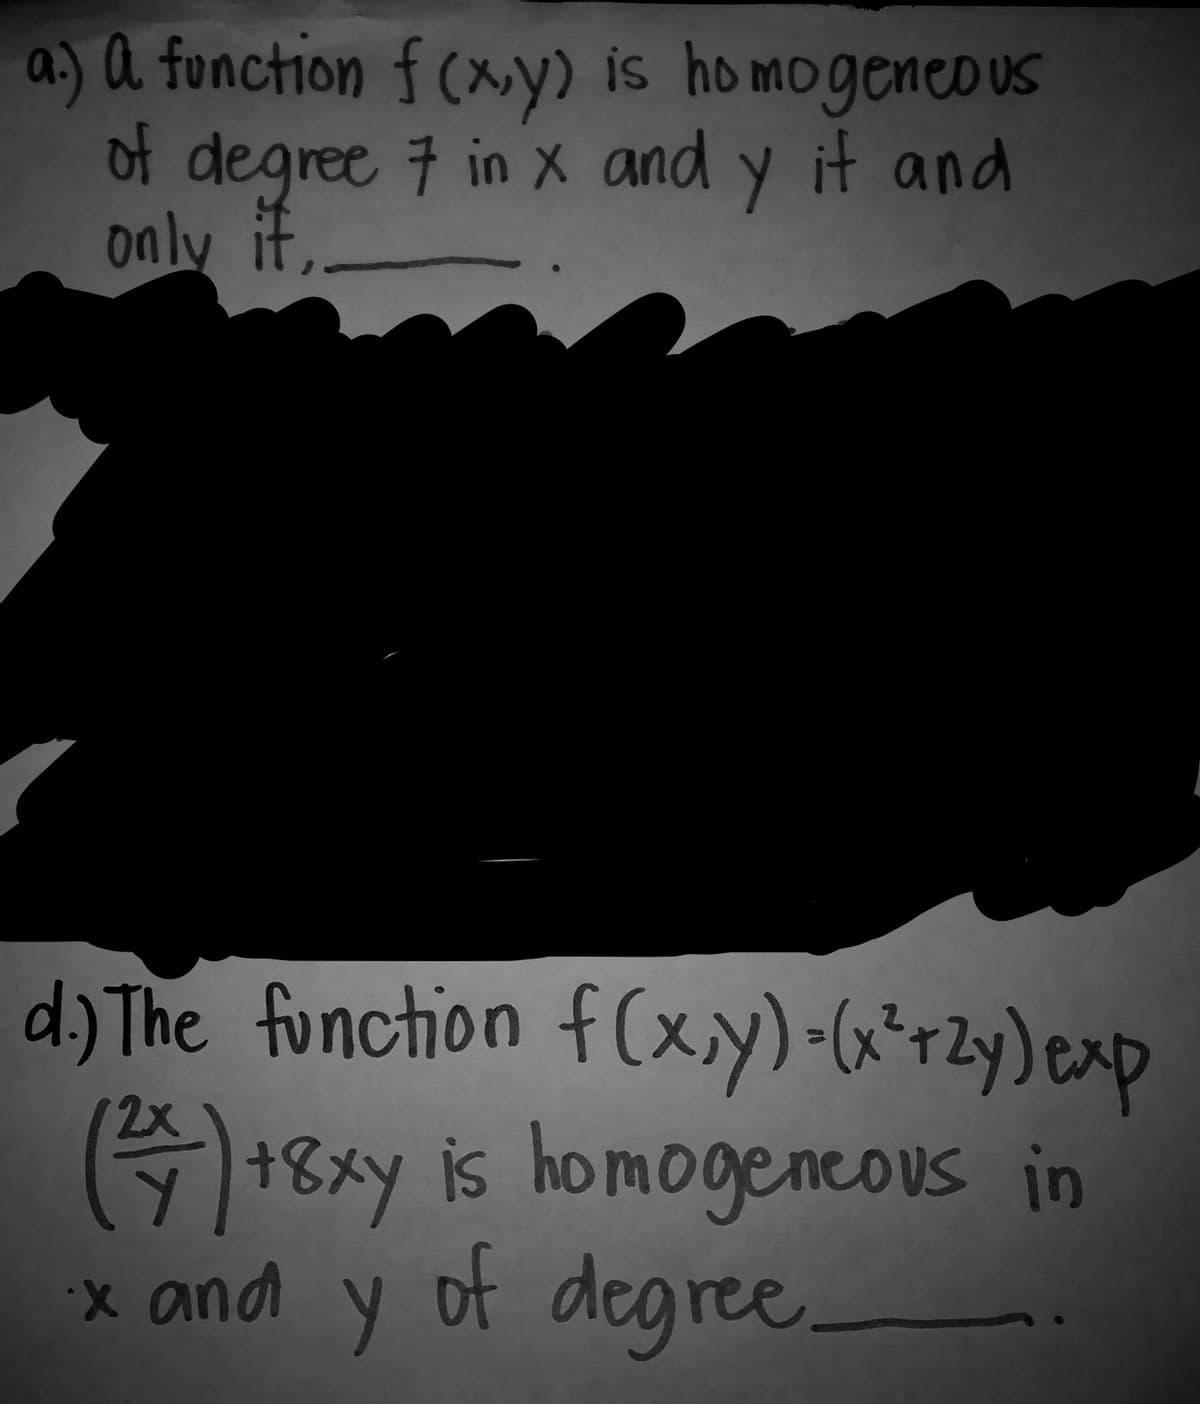 a) a fonction f (xy) is homogeneo US
of degree 7 in x and y it and
only if
s
d) The function f(xy)-«*rzy) exp
2x
+8xy is homogeneous in
COUS
x and y
of degree
